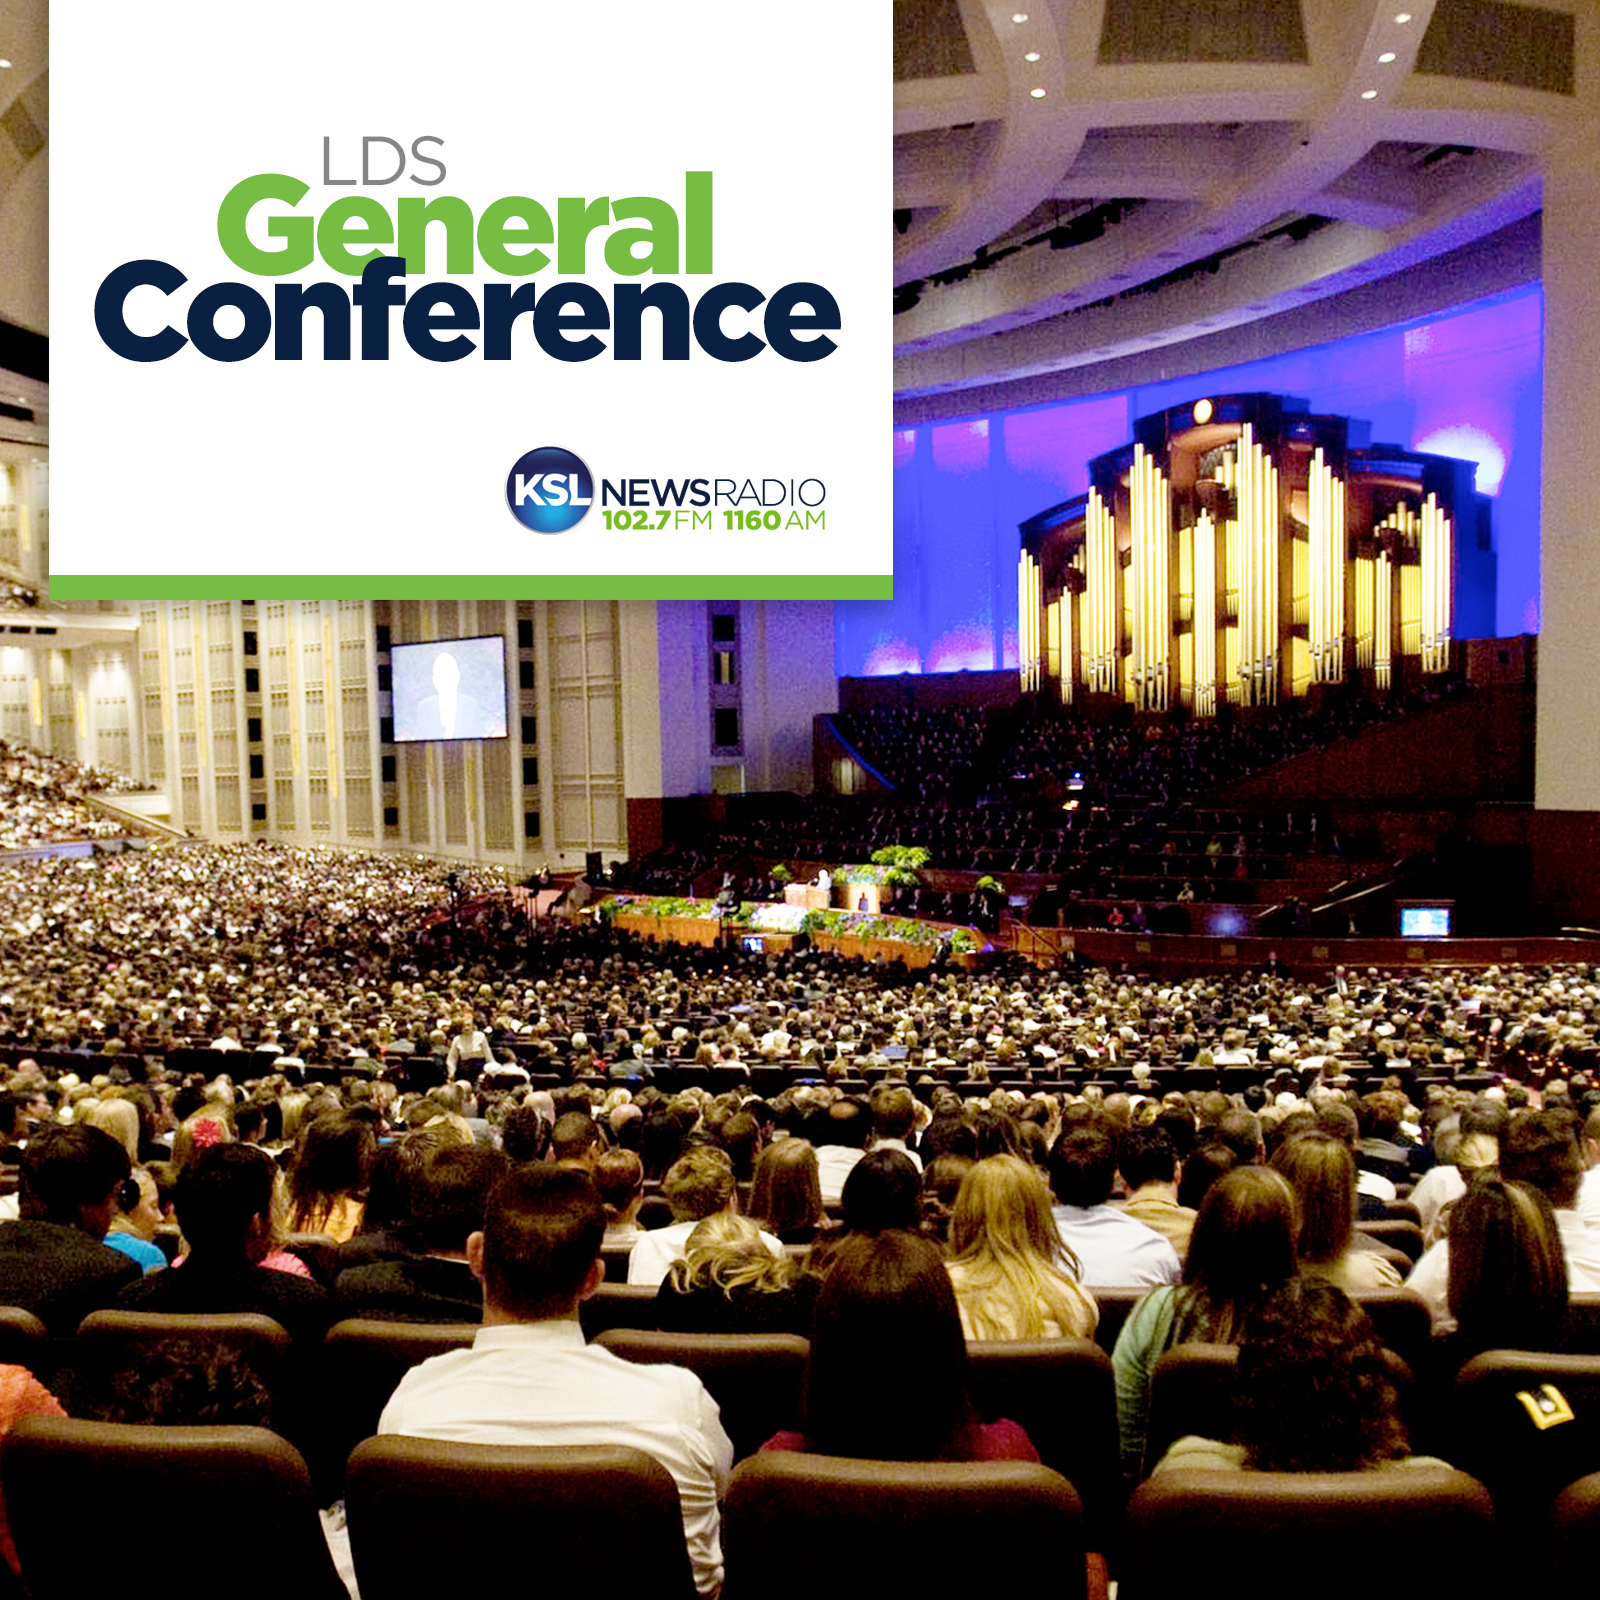 Sunday Morning Session of the 189th Church of Jesus Christ of Latter-Day Saints Semi-Annual General Conference, October 6, 2019